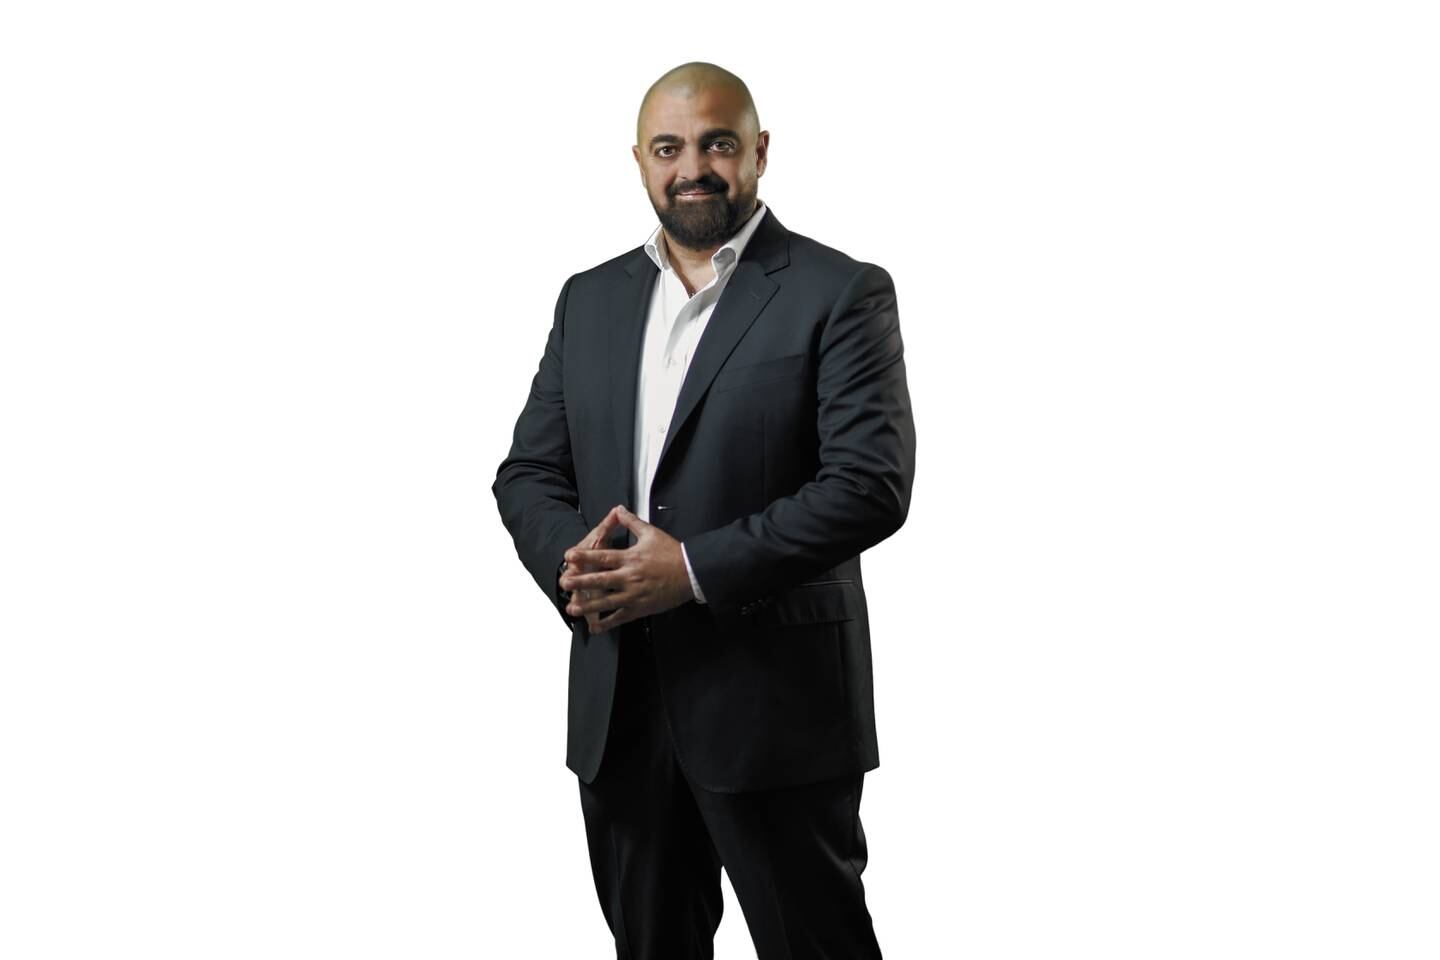 Ibrahim Kamel, chief operating officer and co-founder of Almentor.